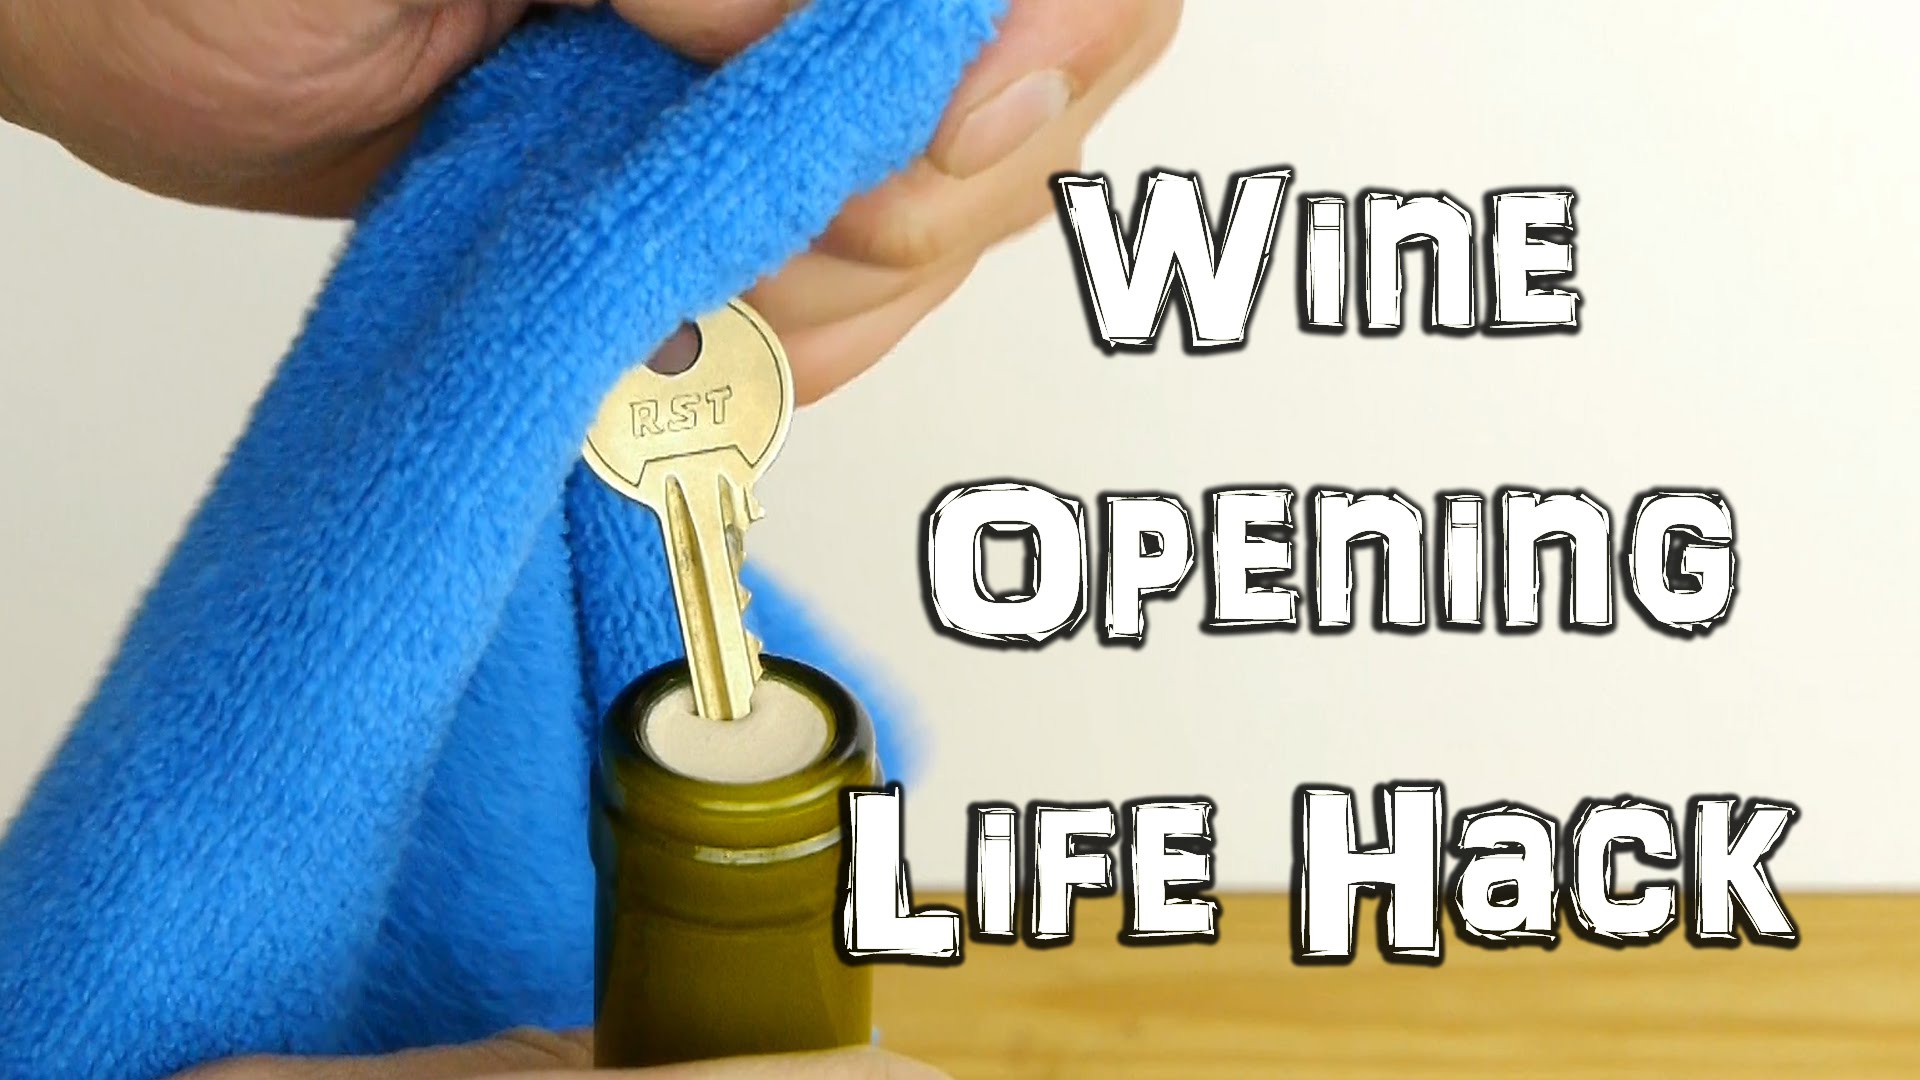 How to Open a Bottle of Wine Using a Key